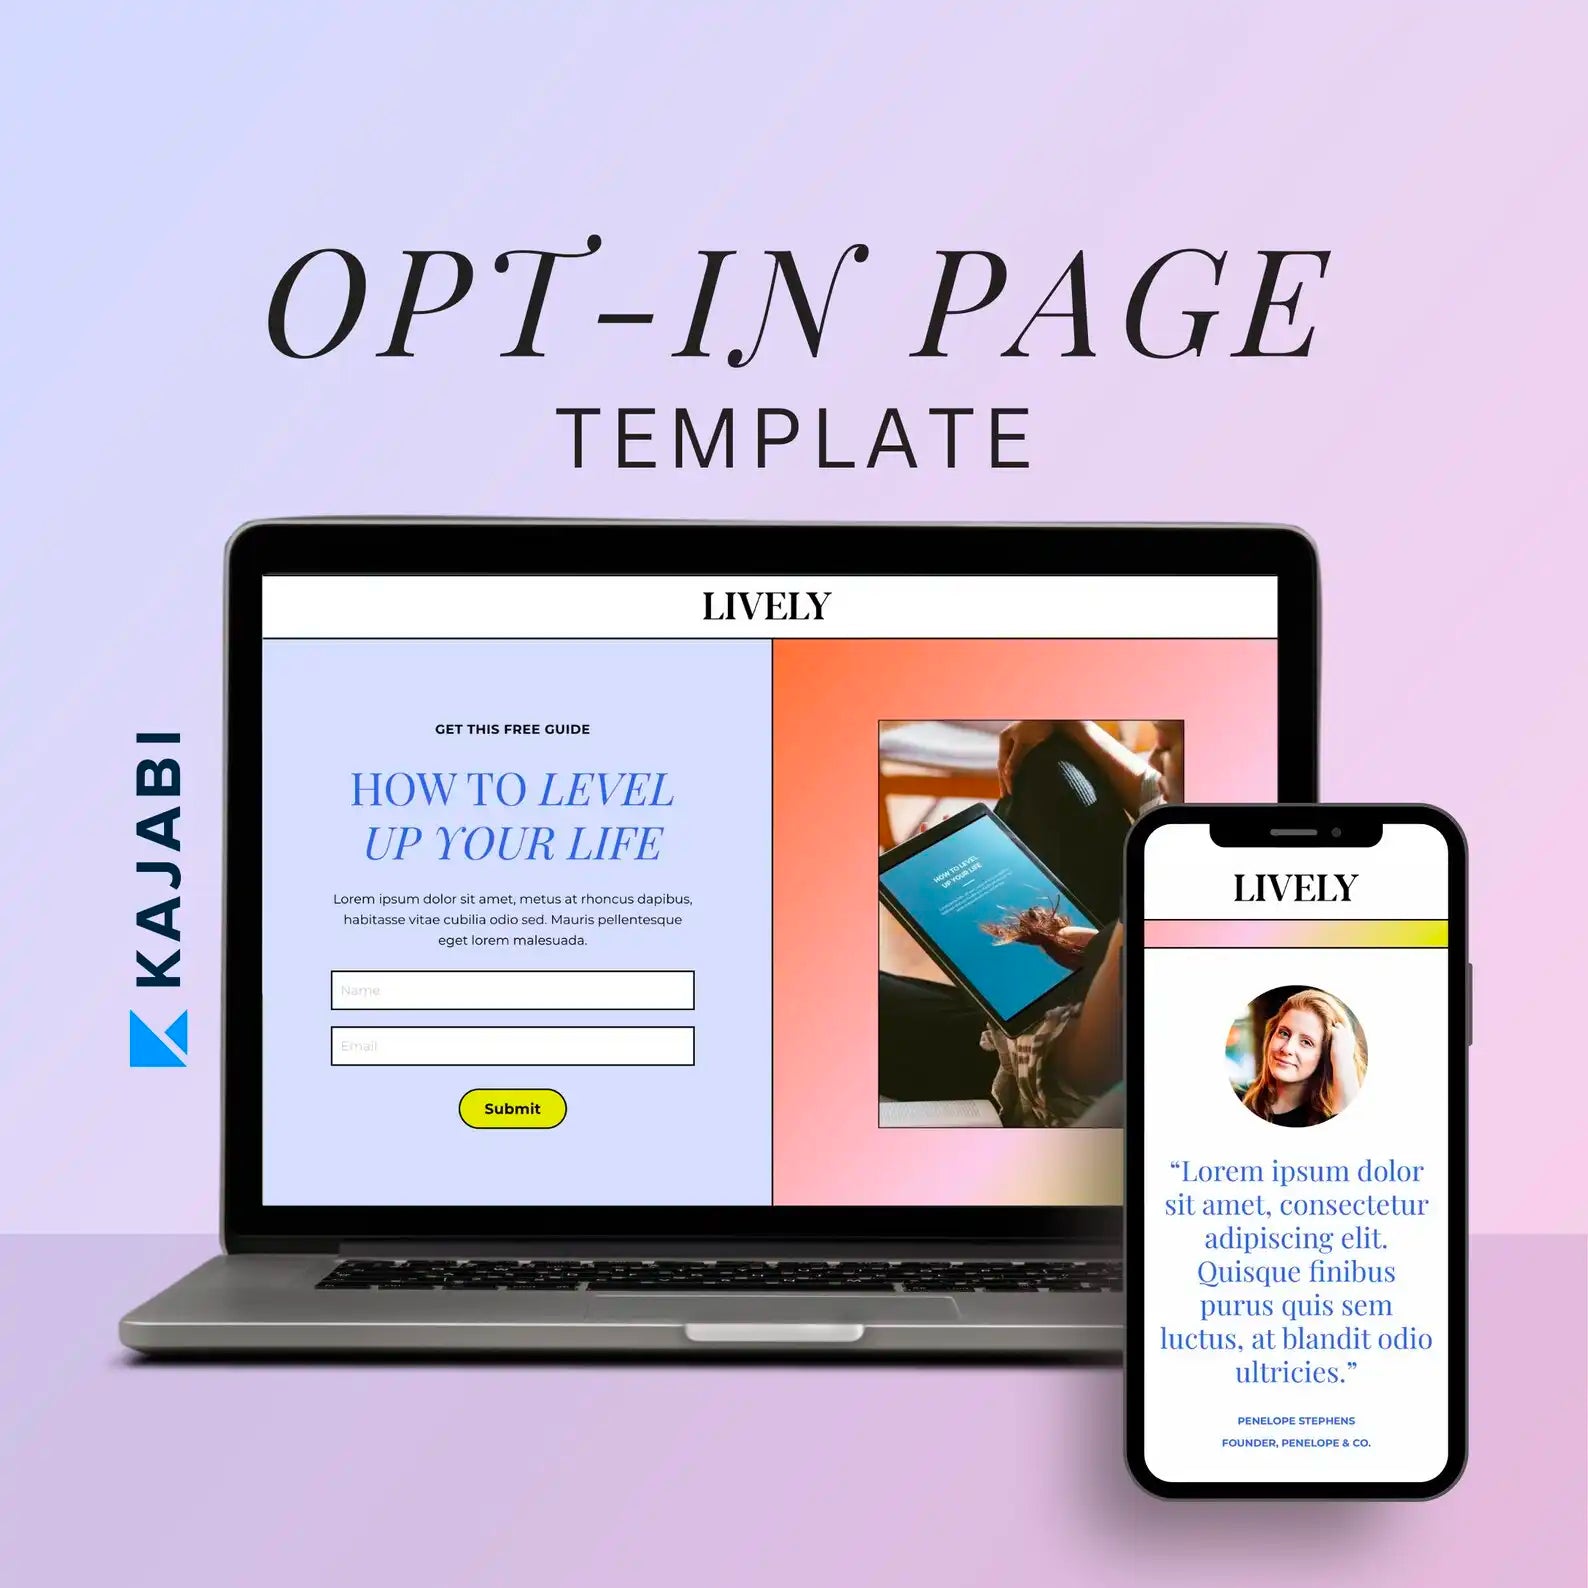 Just-Add-Your-Brand_Kajabi-Template_Opt-In-Page_Lively-1.webp